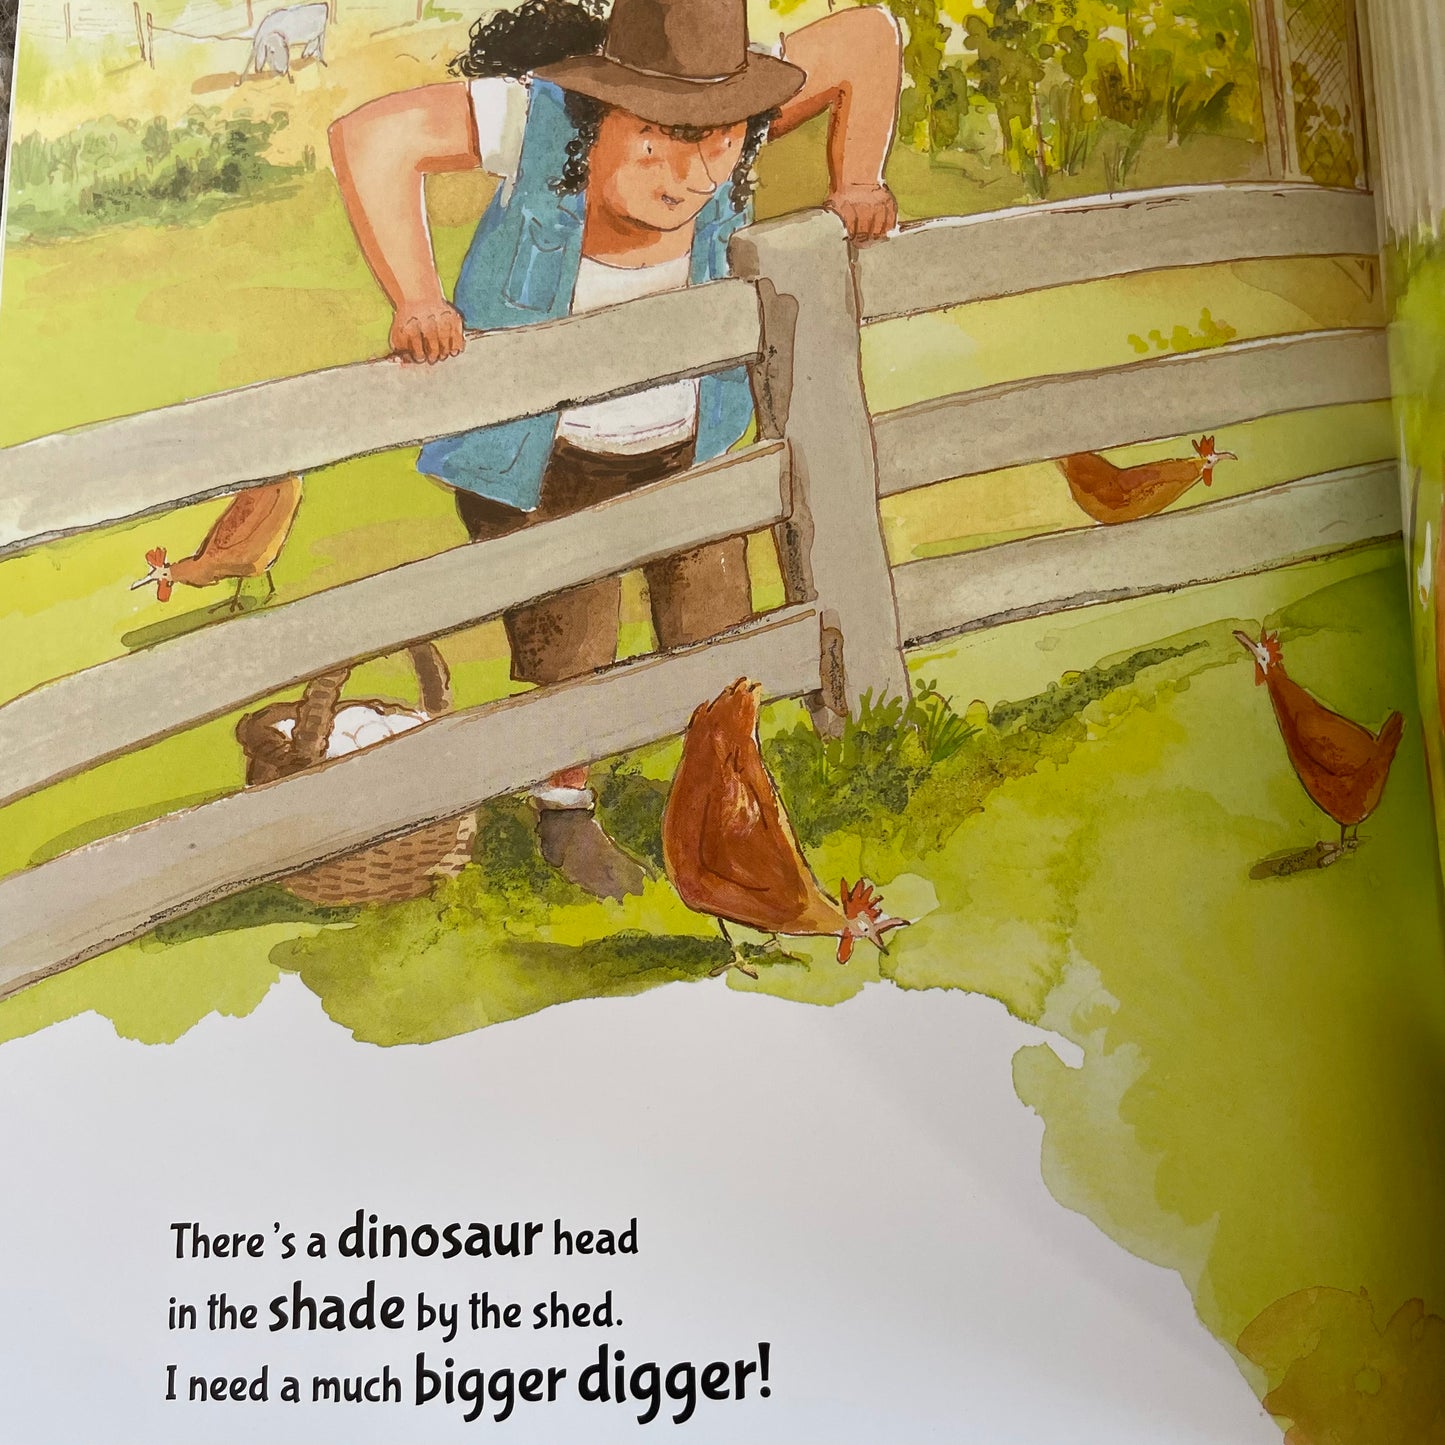 Inside pages from the book showing a picture of a farmer looking over the fence at some brown hens.